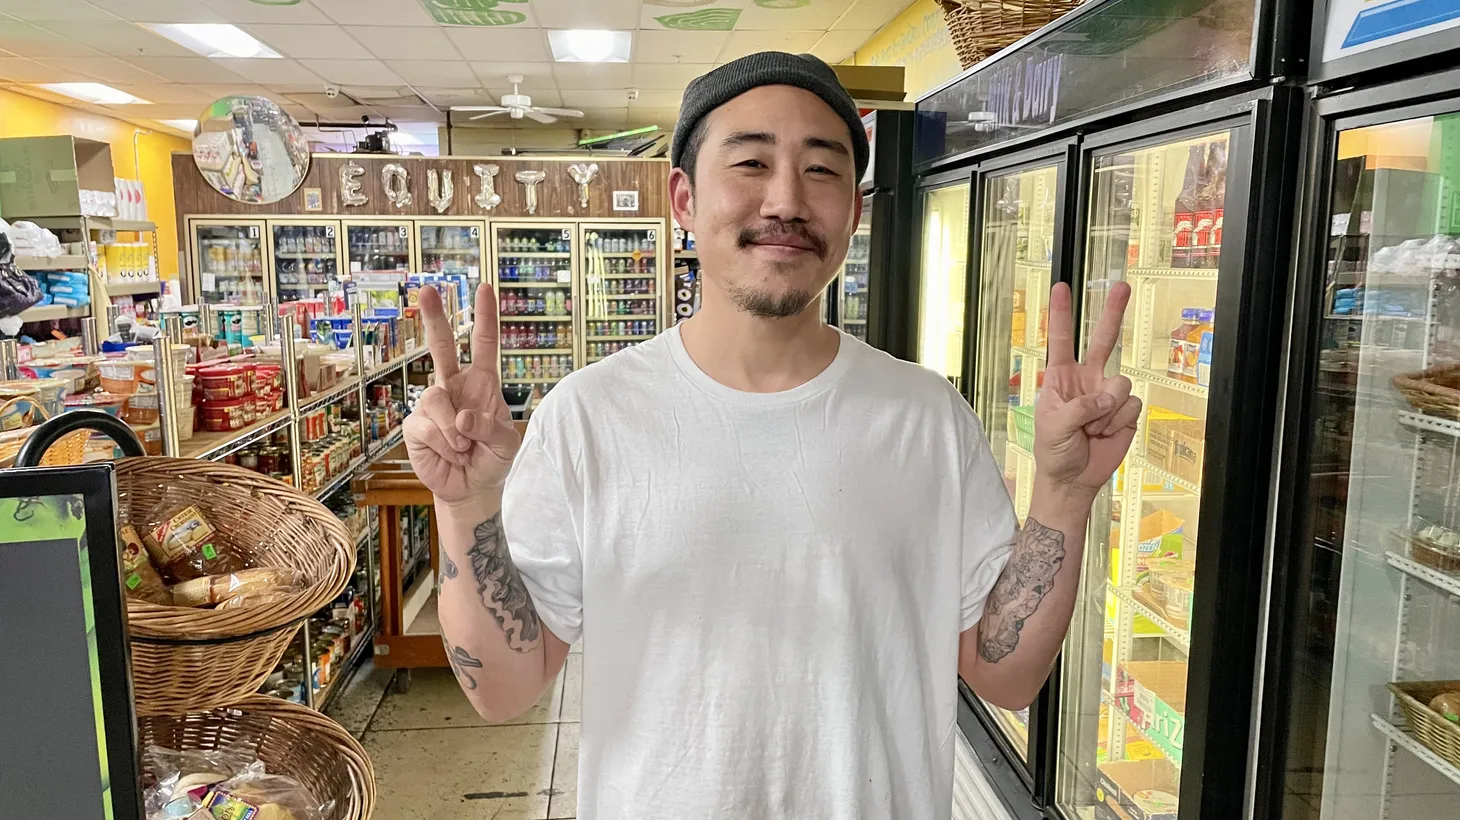 Danny Park took over the Skid Row People’s Market in 2018 and combined the convenience store business model with grassroots community organizing.